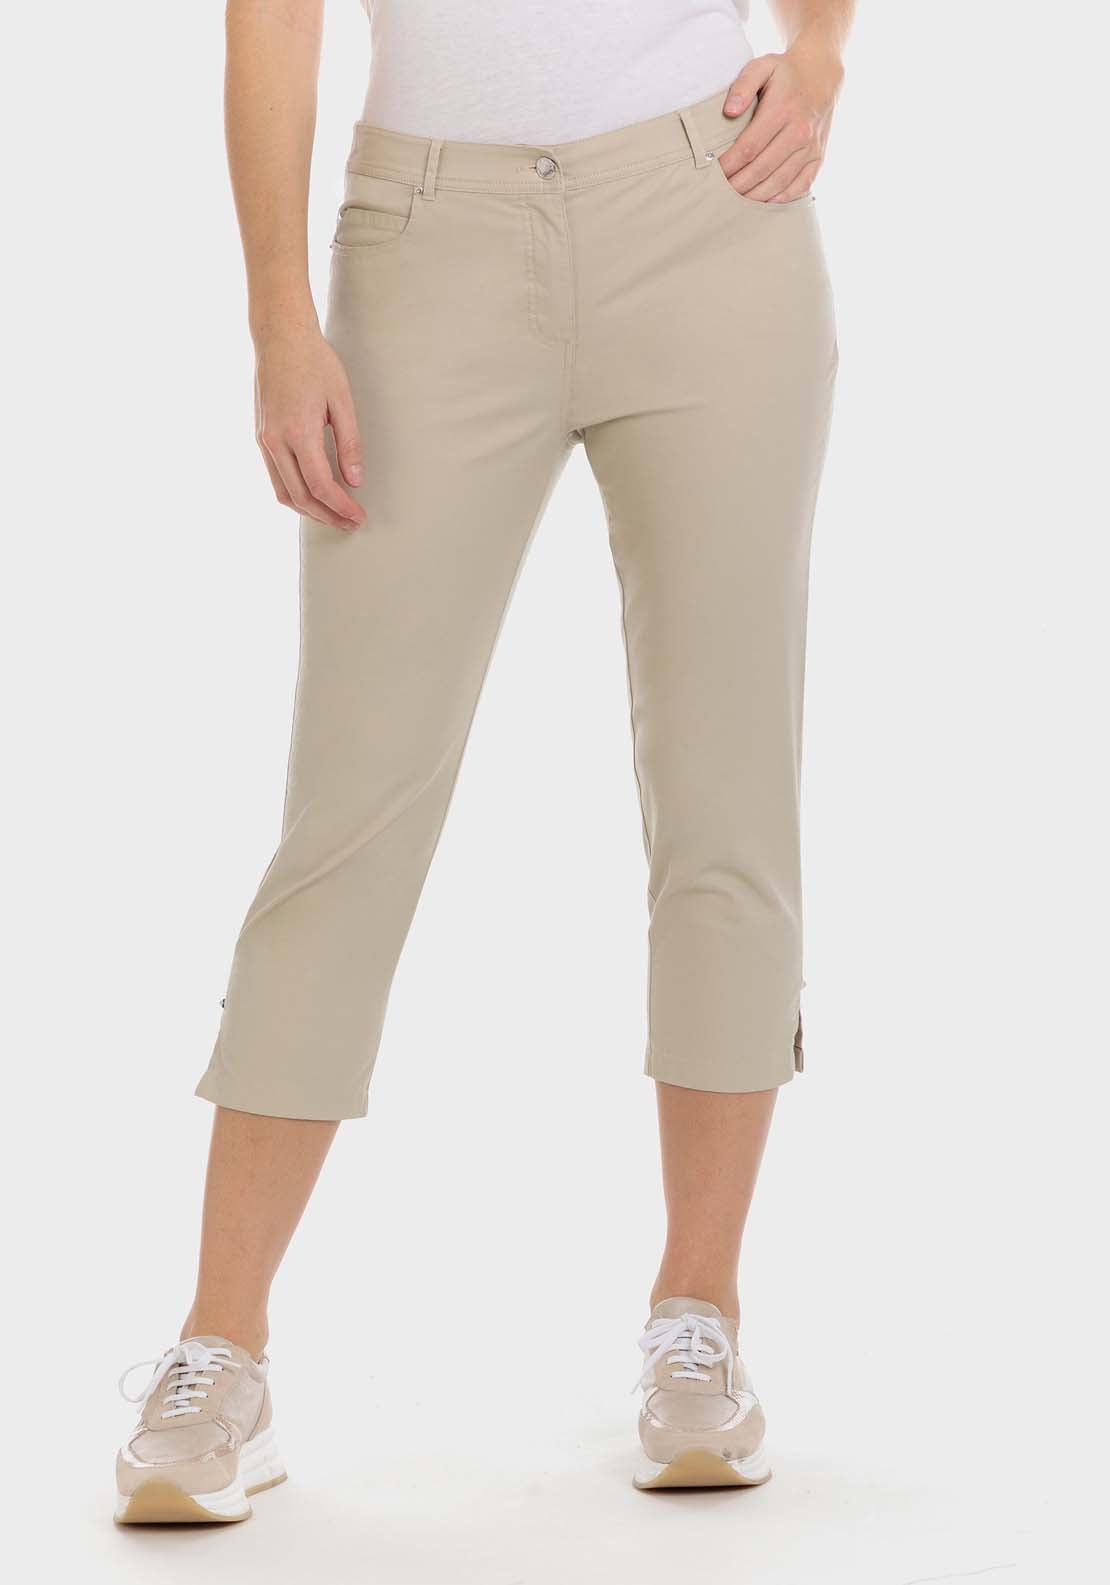 Punt Roma Cotton Crop Trousers - Beige 1 Shaws Department Stores